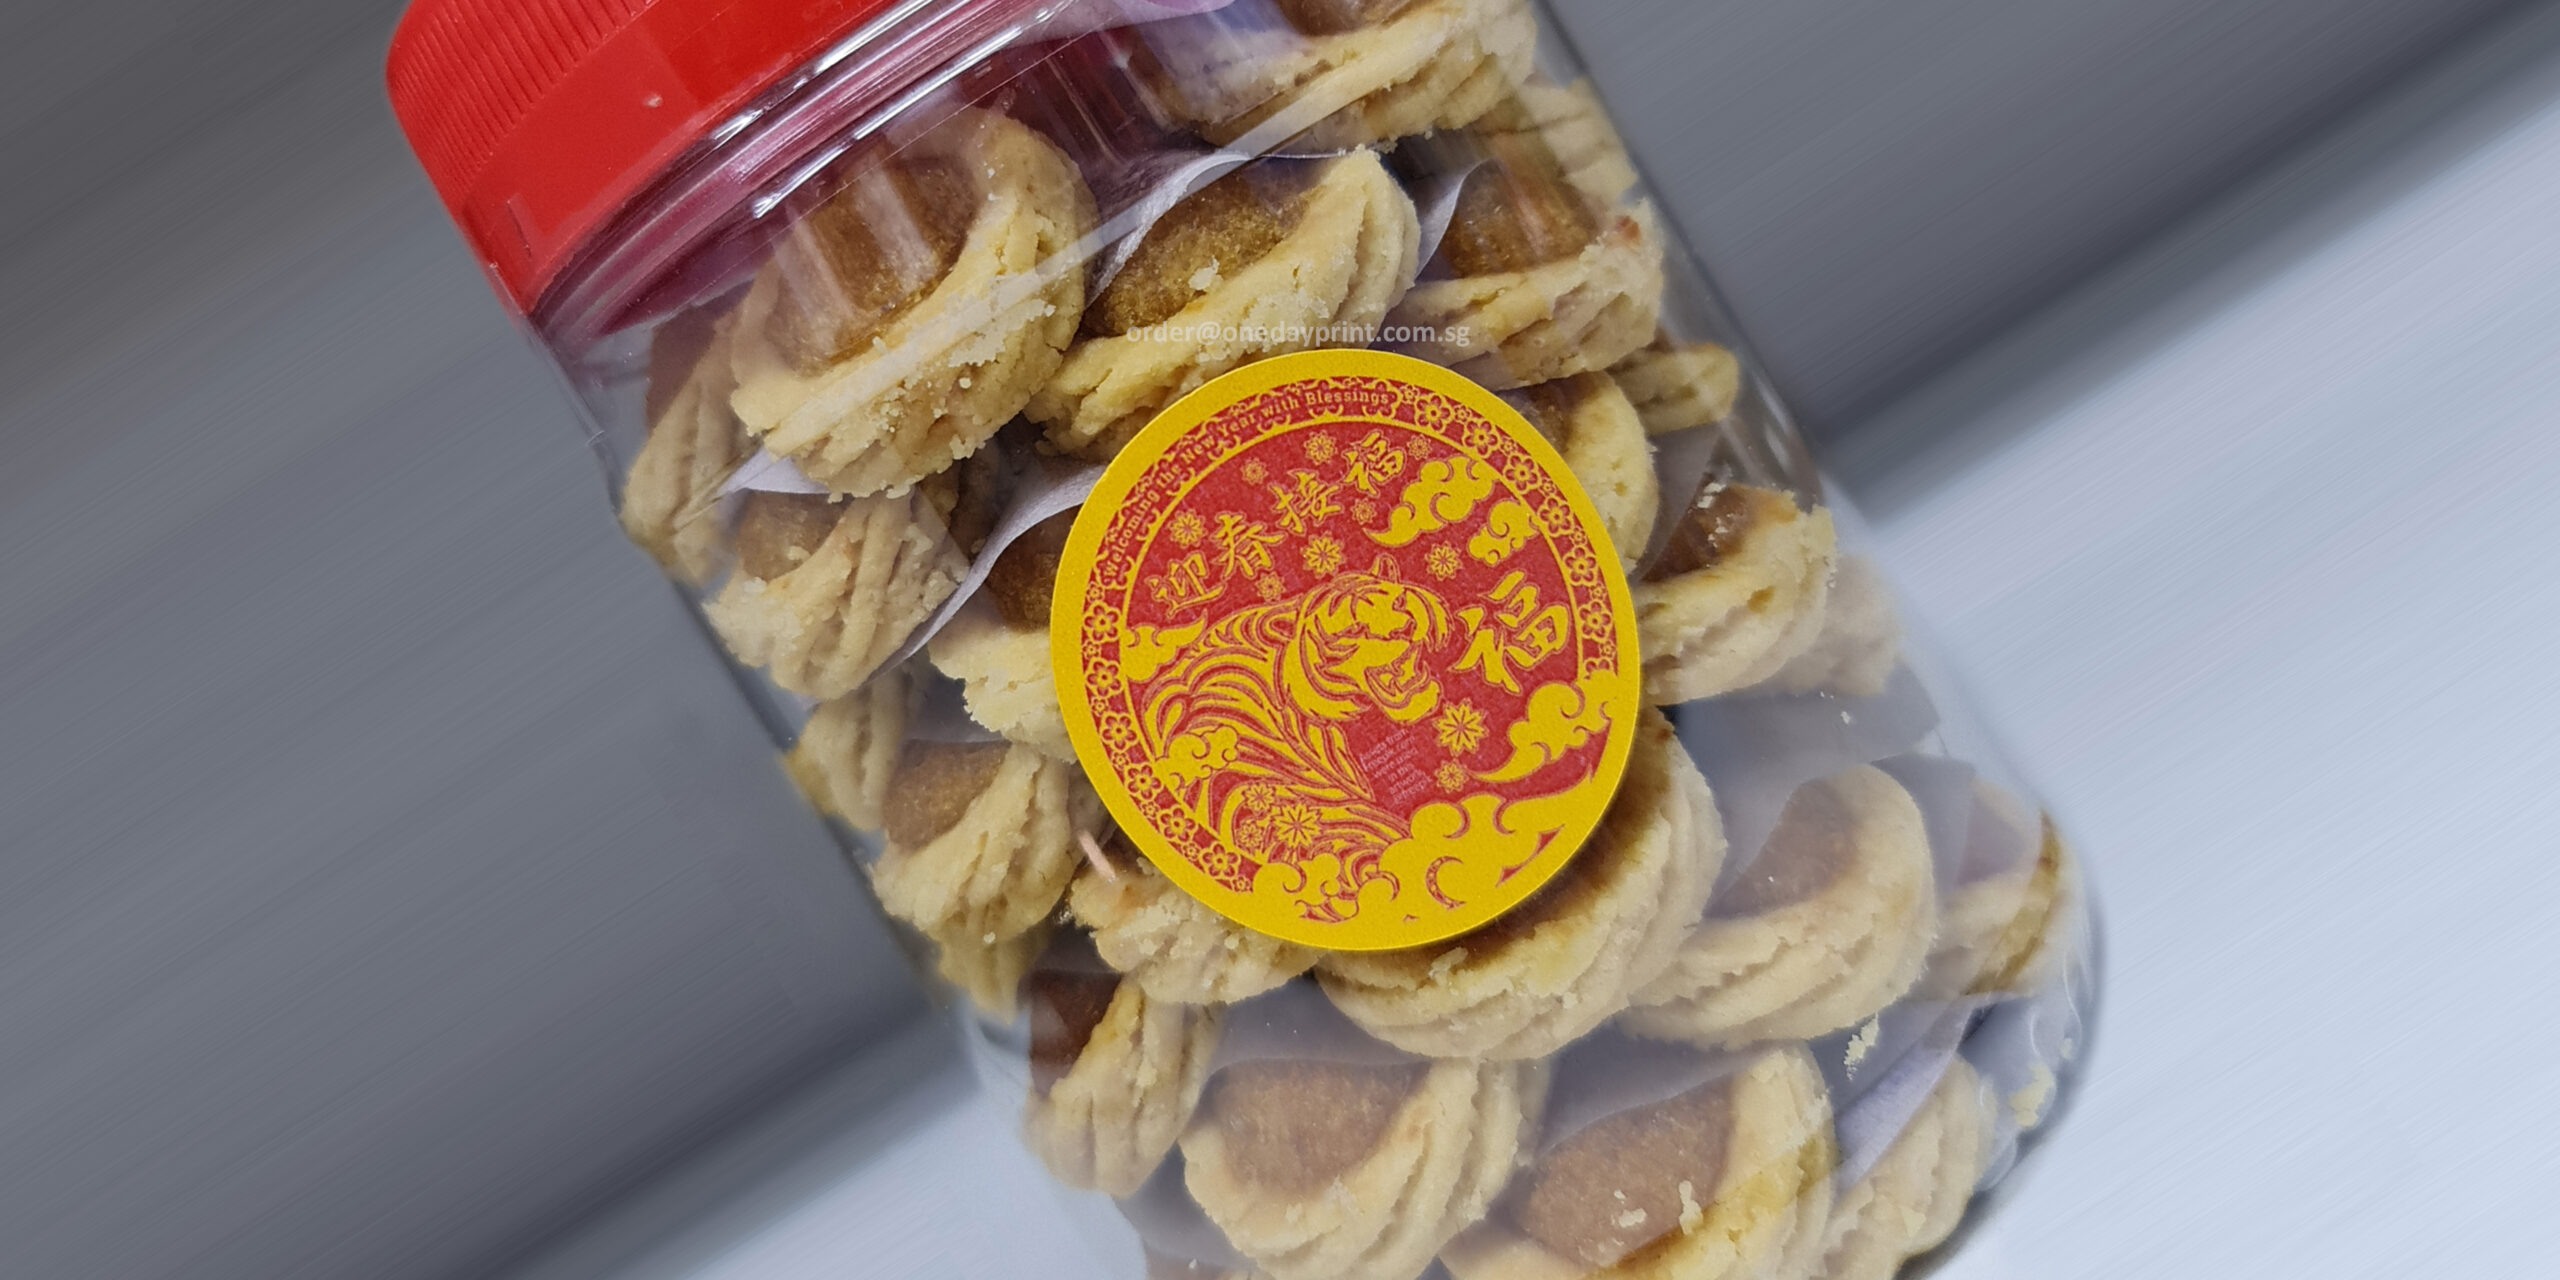 Round Shape Stickers, Sand Gold Paper Sticker Material, goes well with Pineapple tarts for CNY!